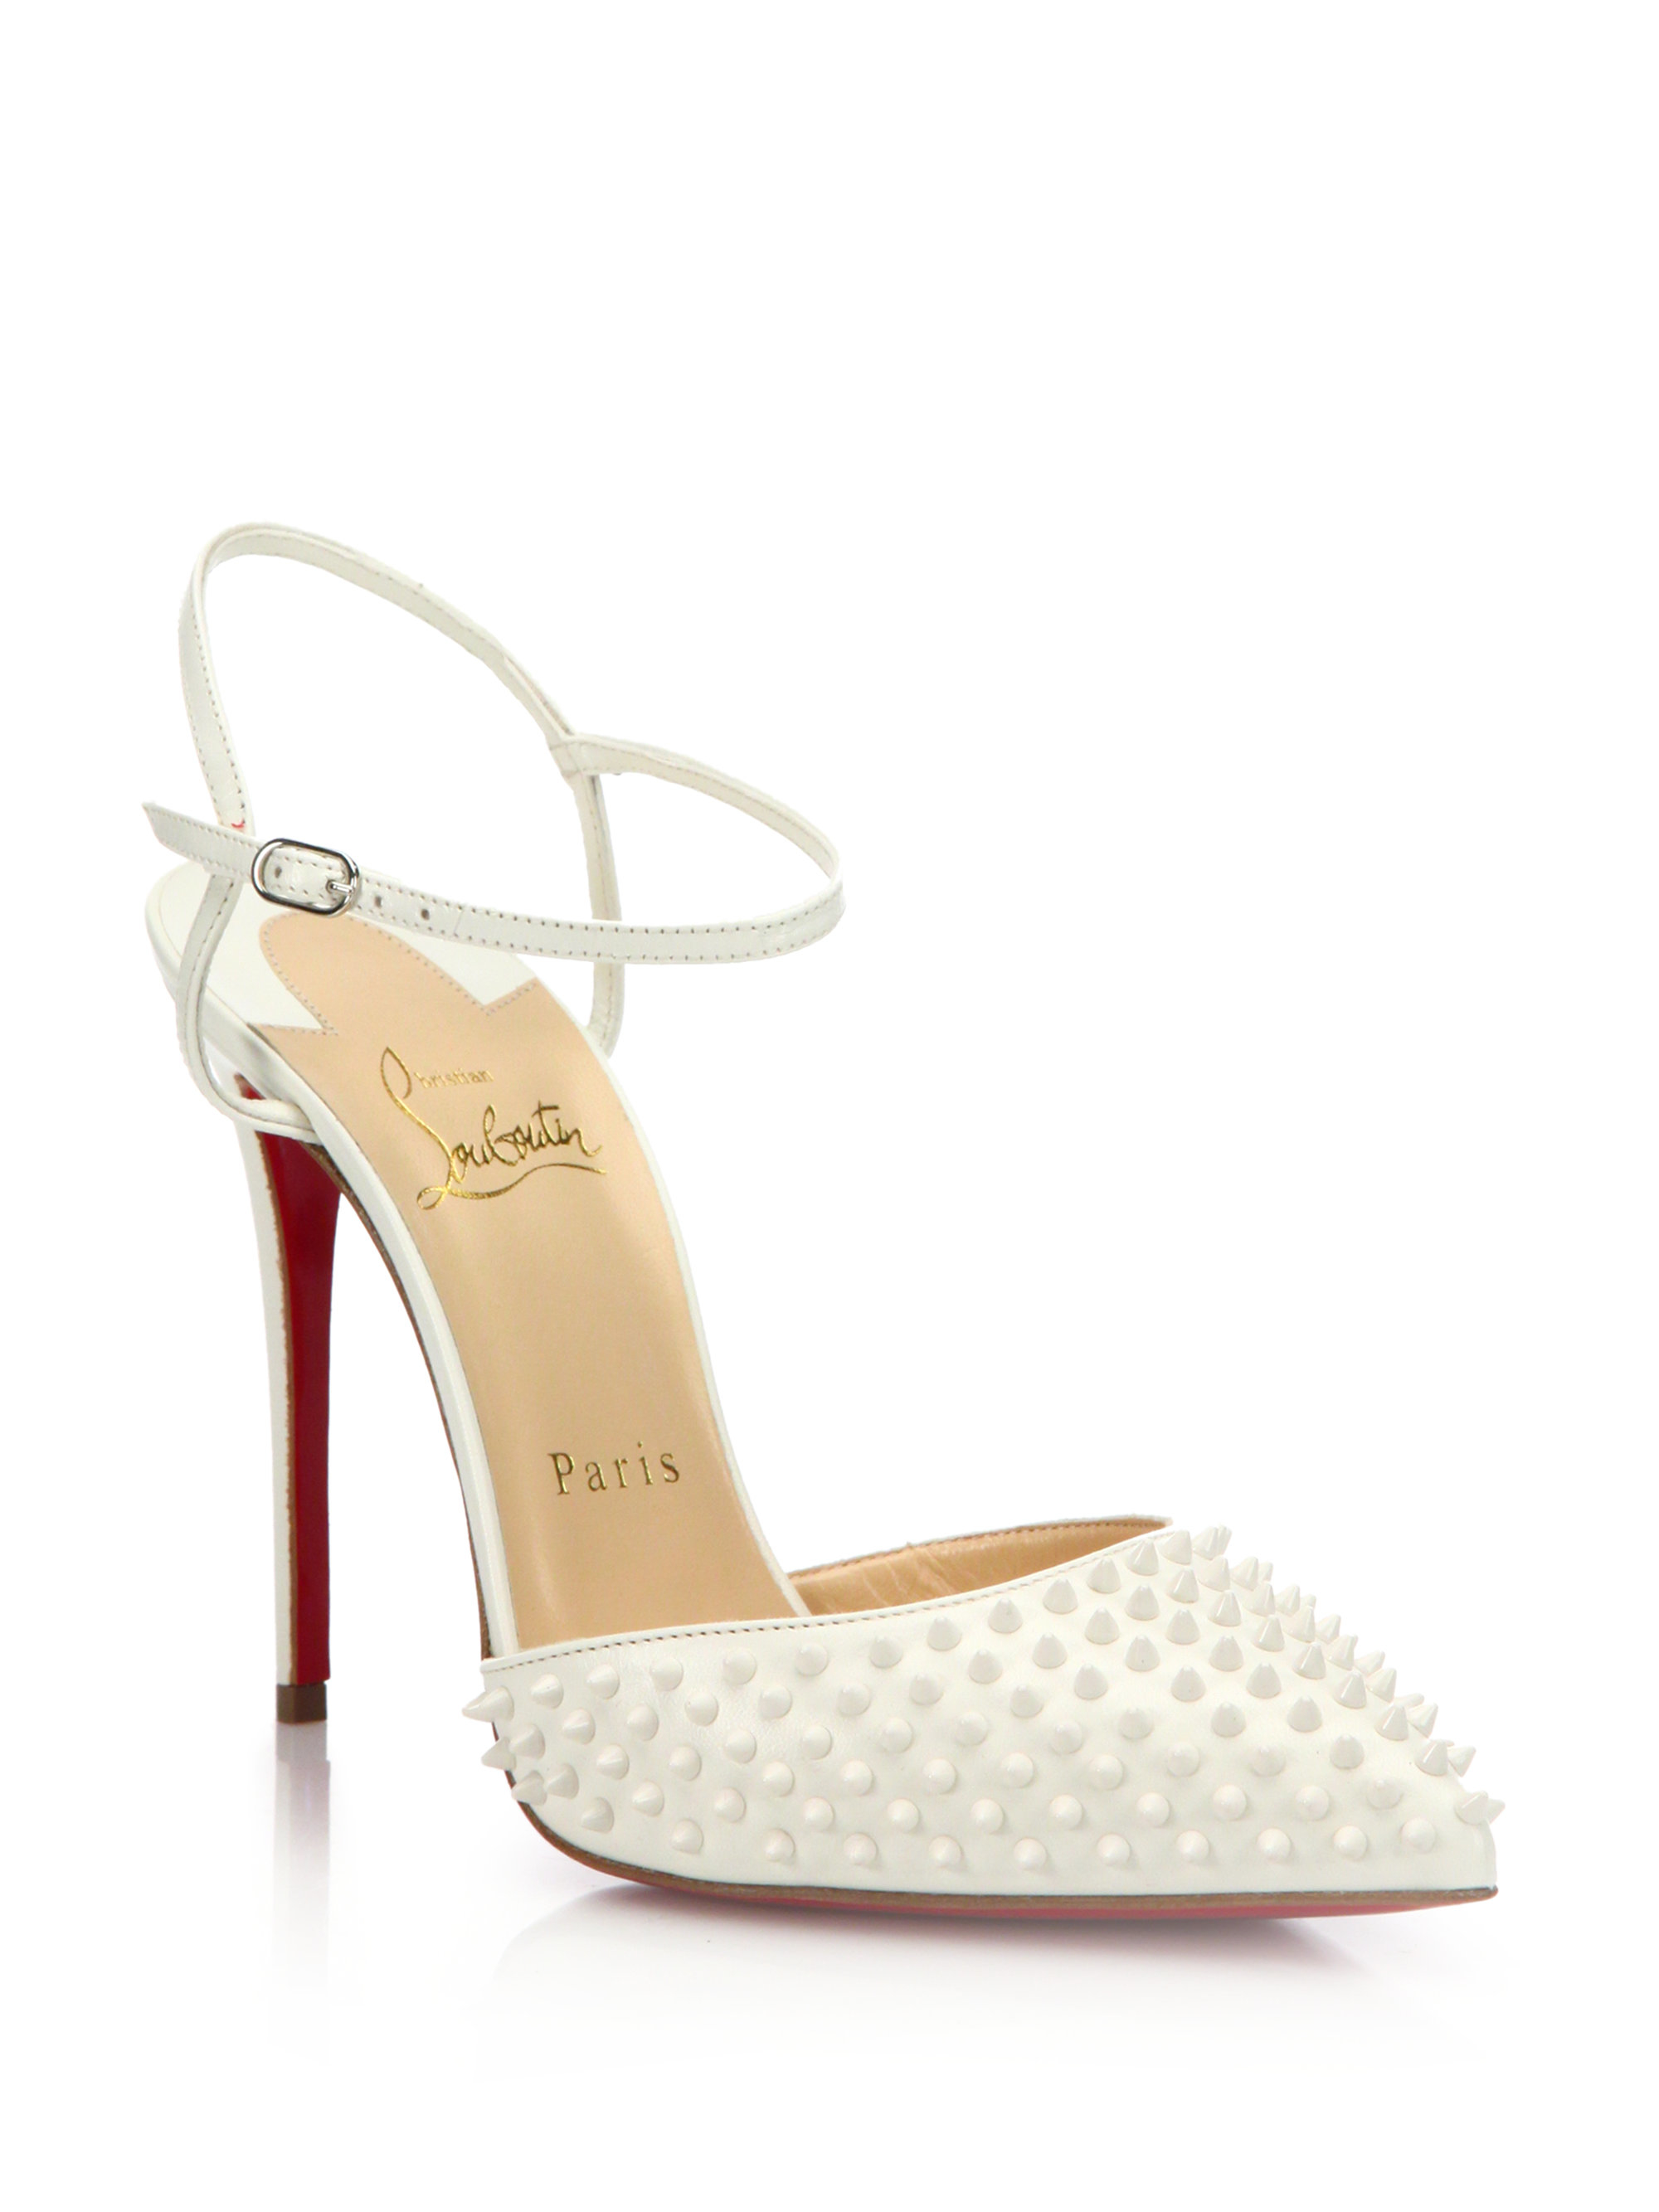 Christian louboutin Spiked Patent Leather Slingback Pumps in White ...